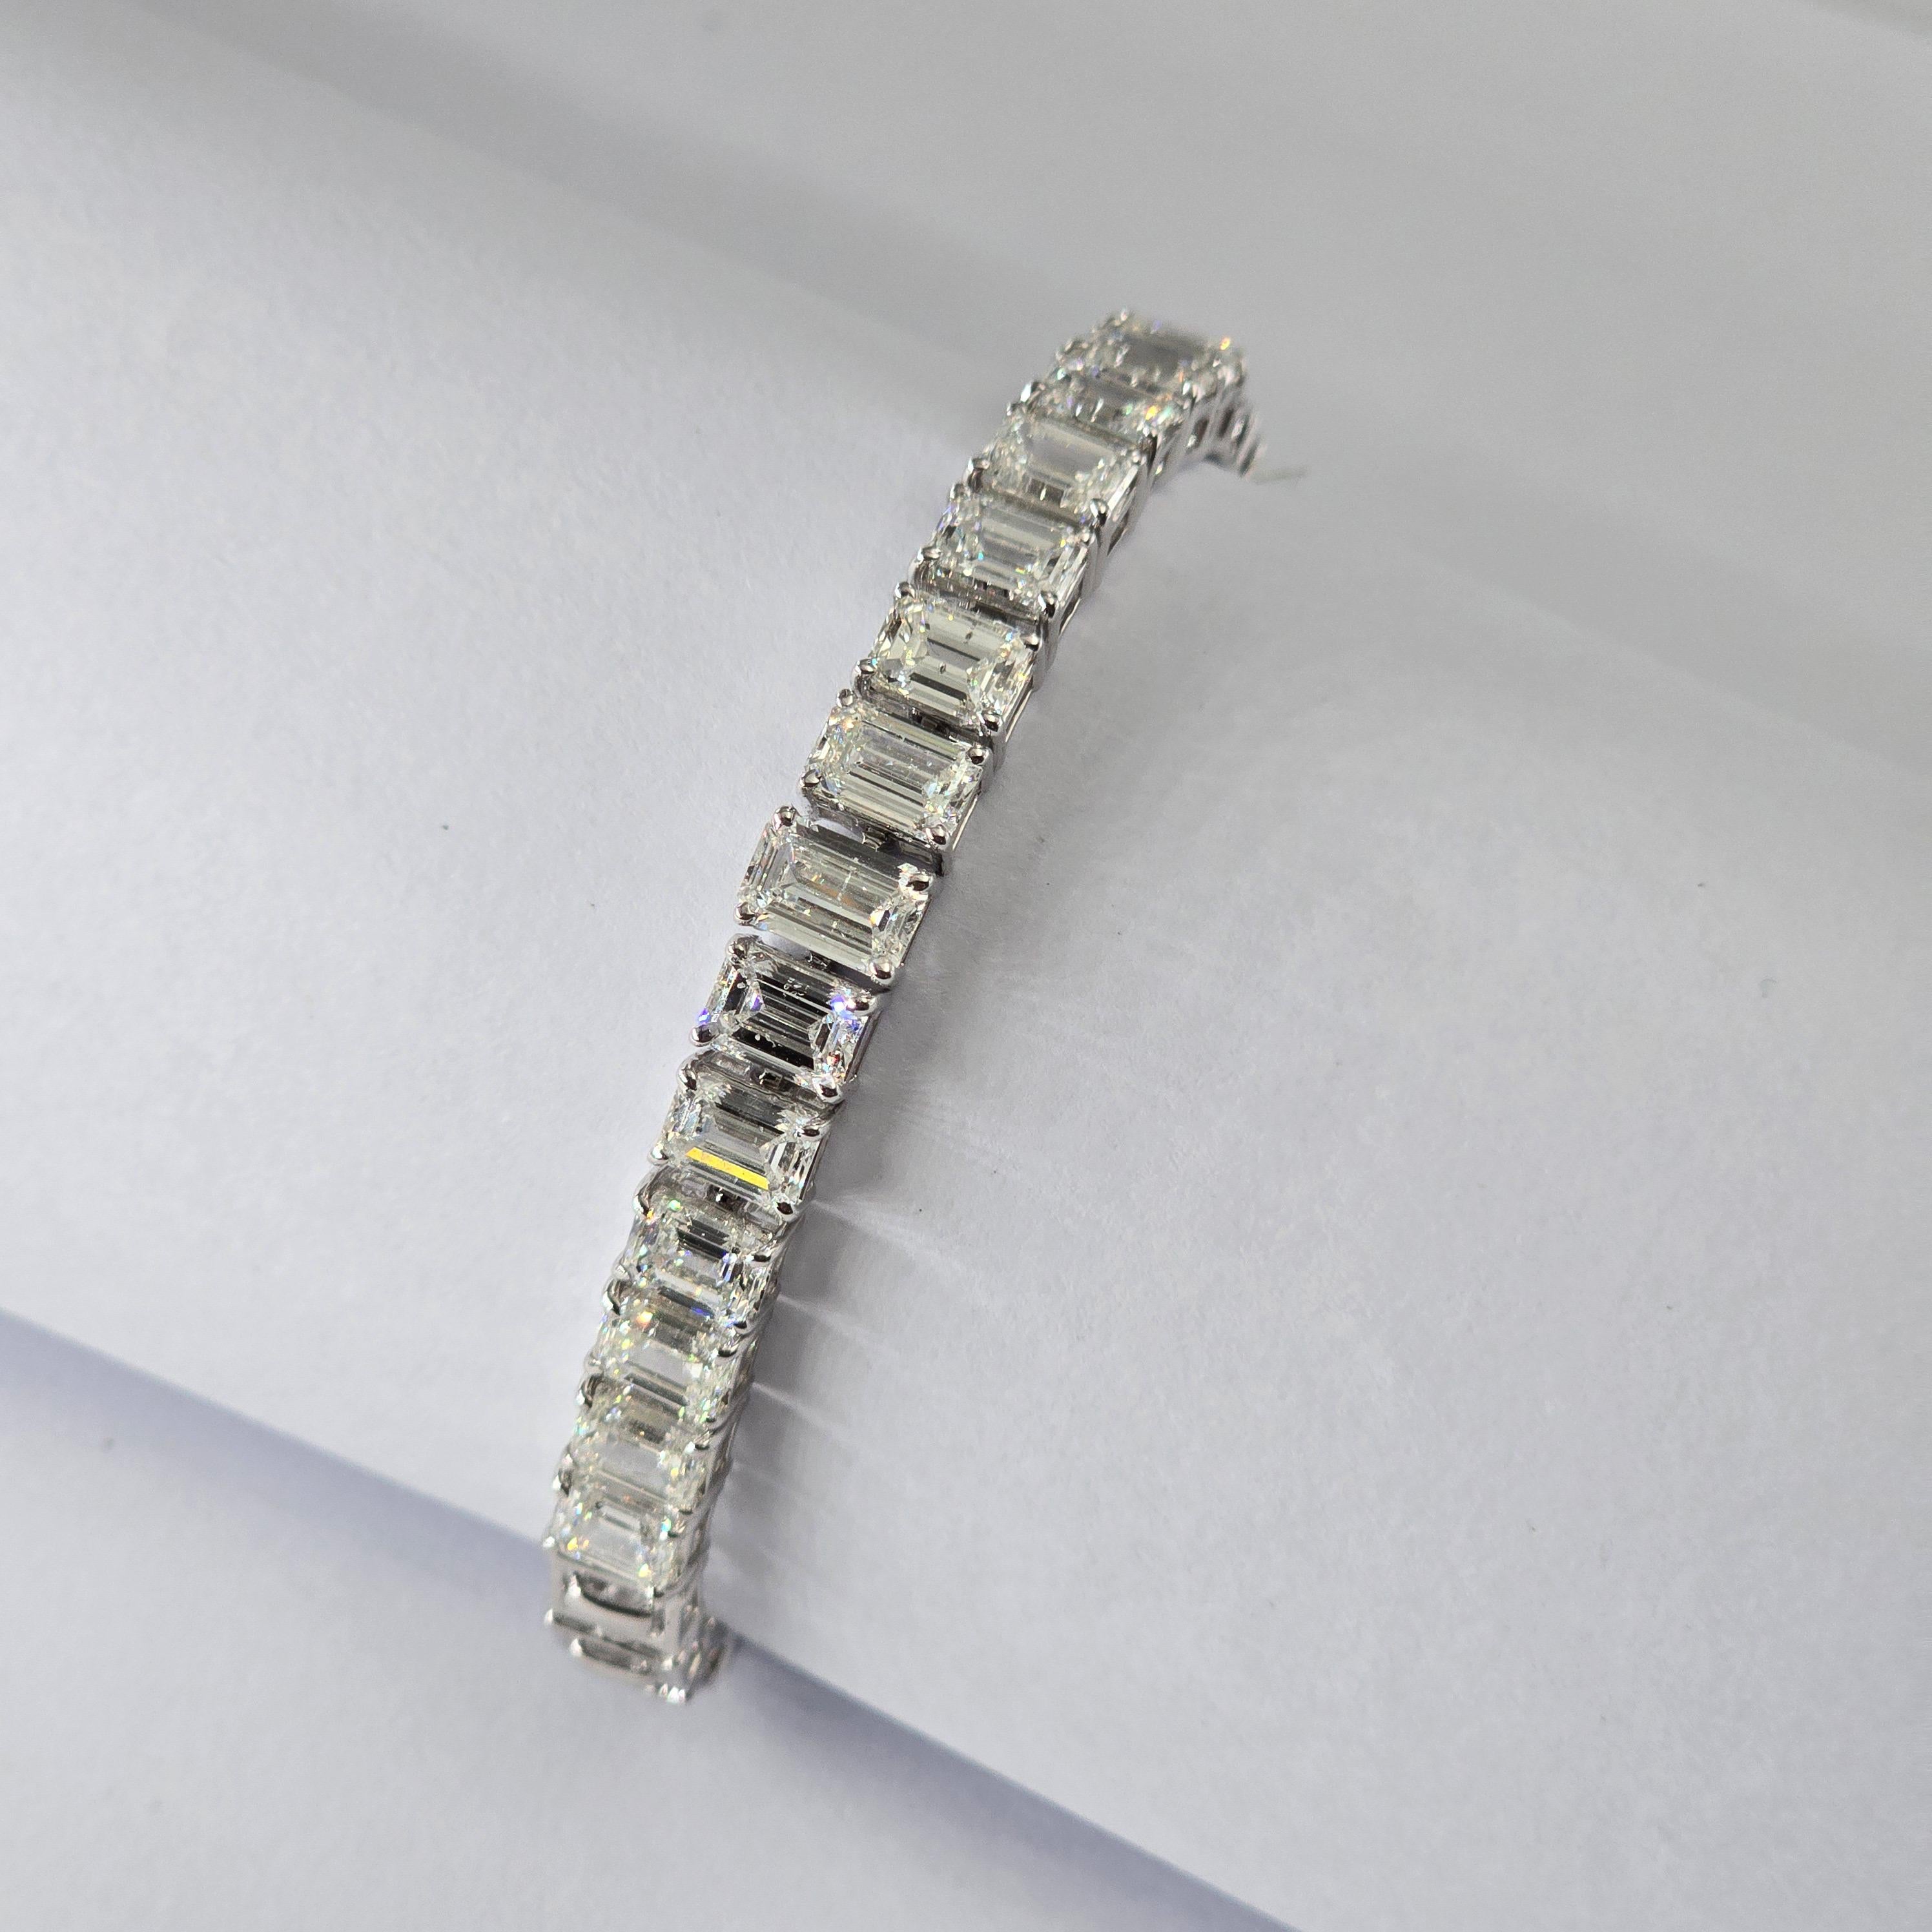 This is a natural  bracelet with diamonds and 14k gold. The are very high quality and very good quality diamonds the clarity is vsi and G colour


diamonds : 10.08 carats
gold : 17.697 gm

This is a brand new piece

. Its very hard to capture the